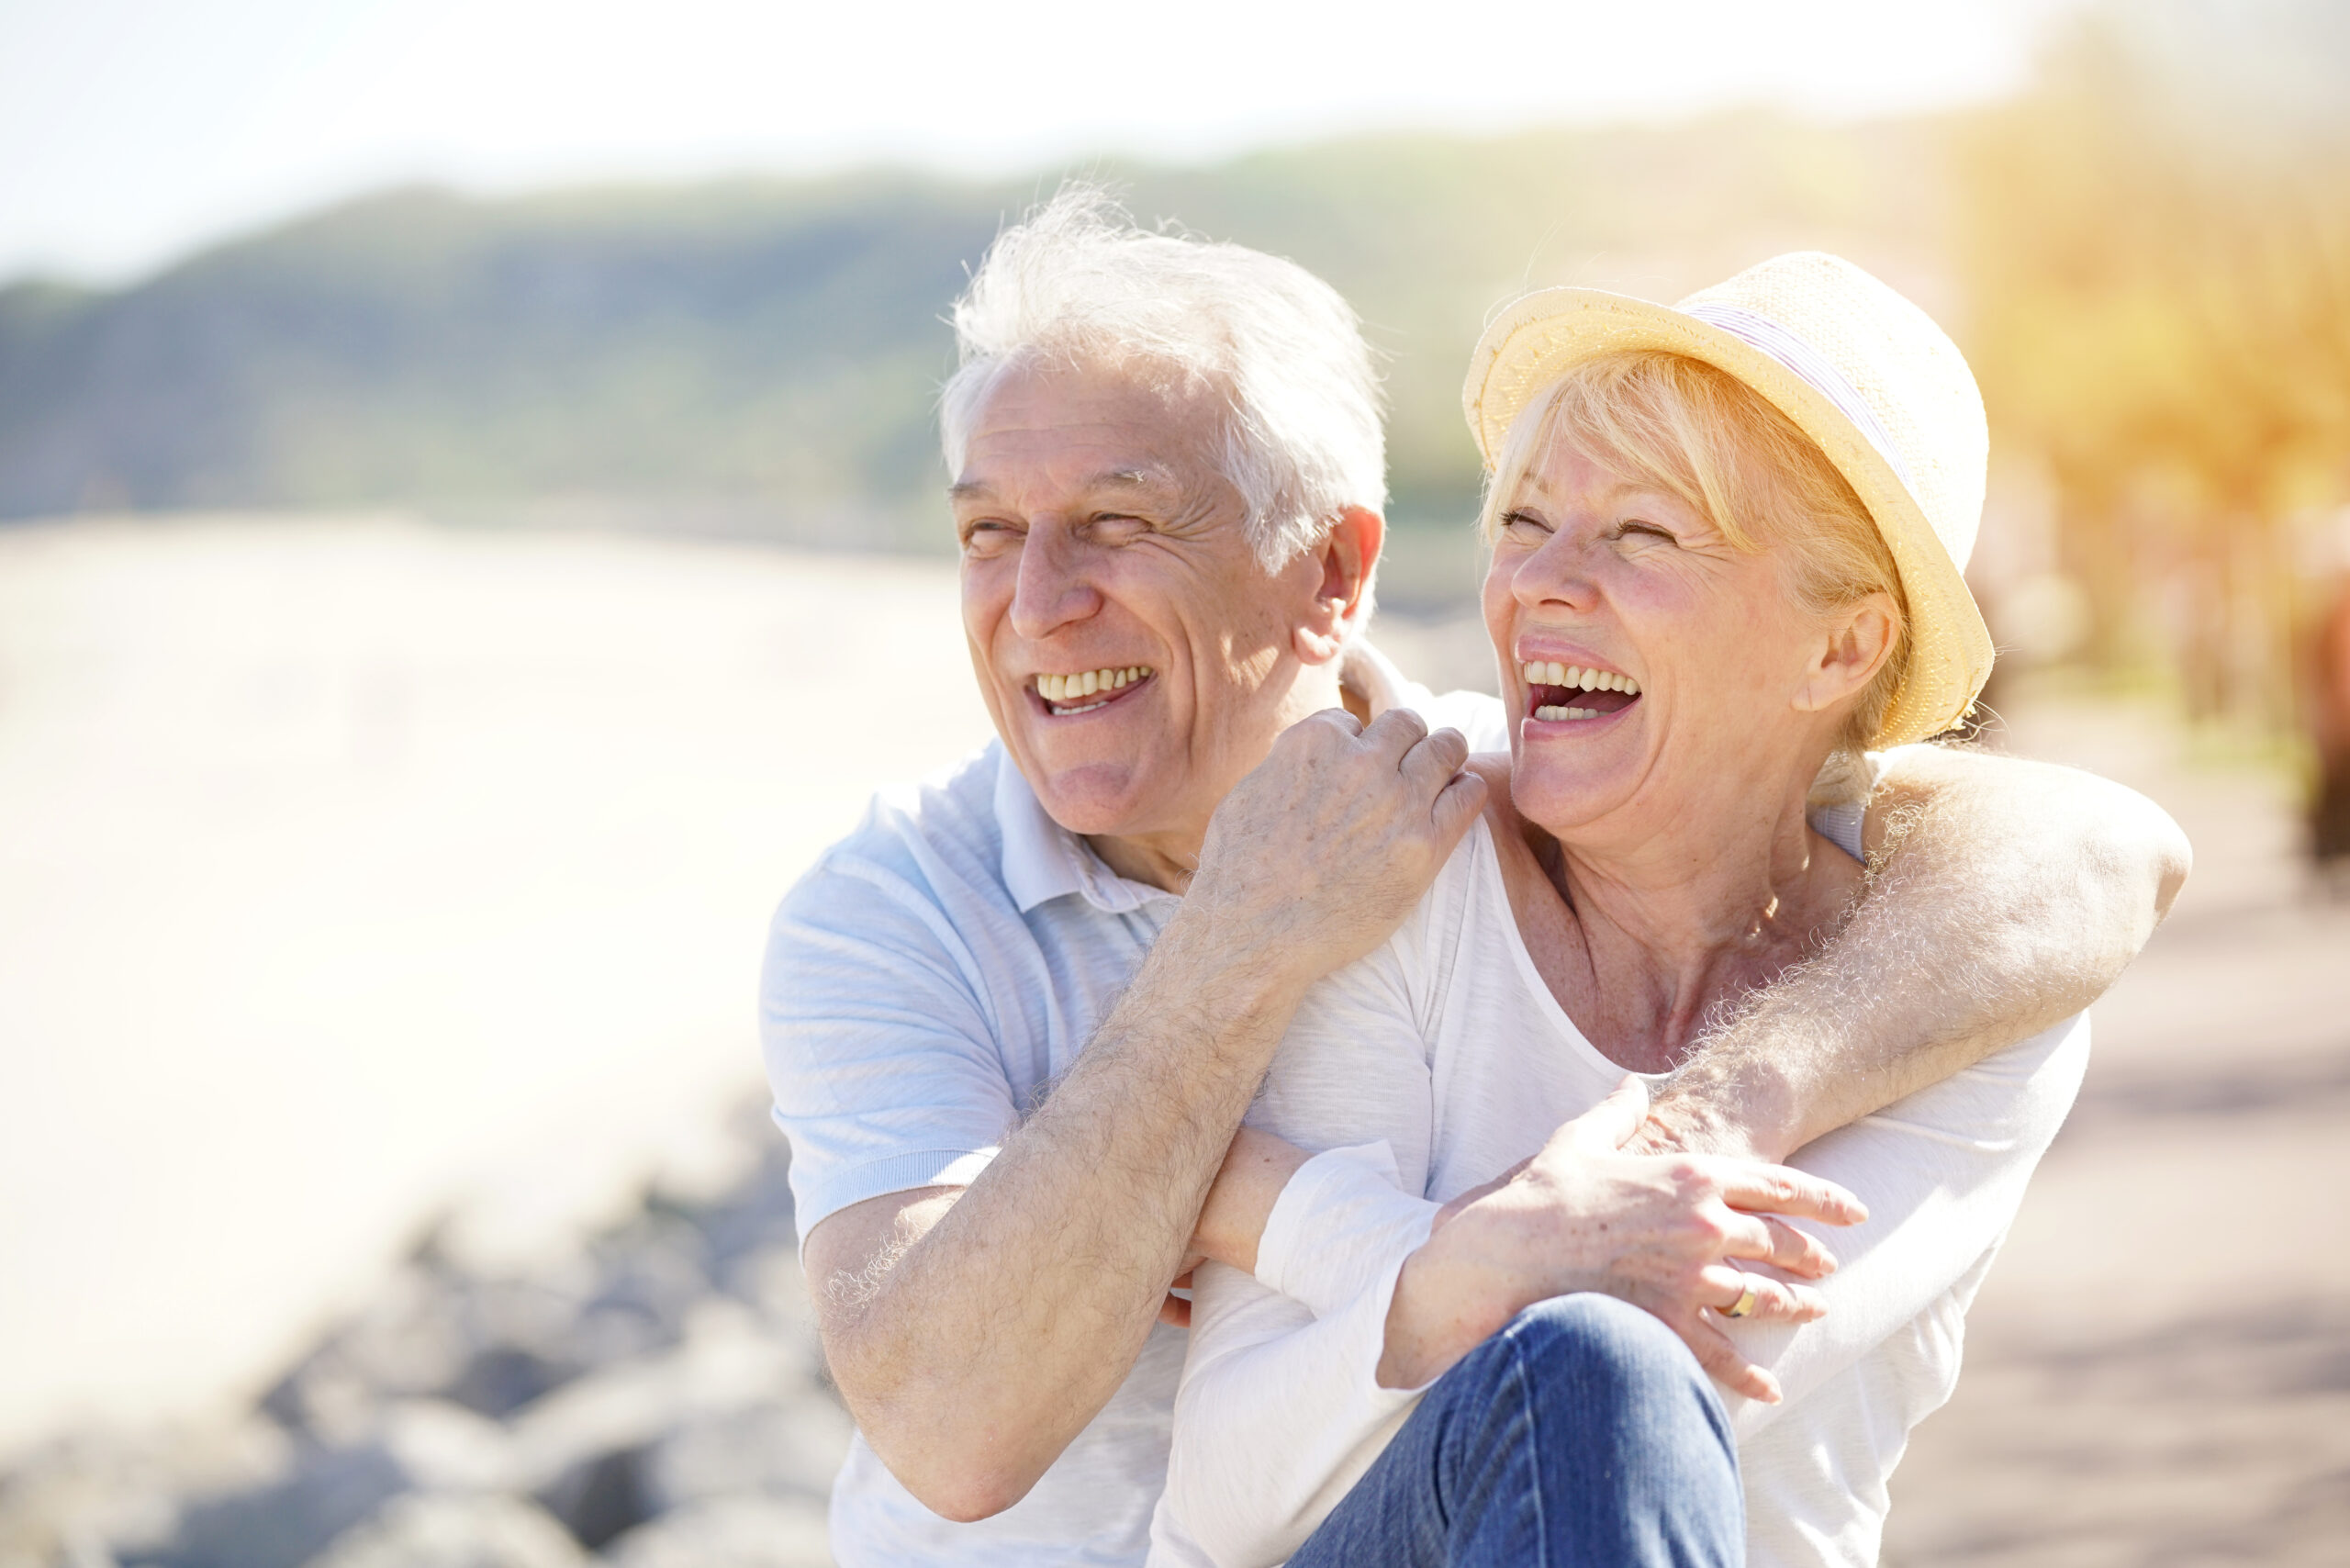 Elderly couple embracing each other lovingly on a serene beach